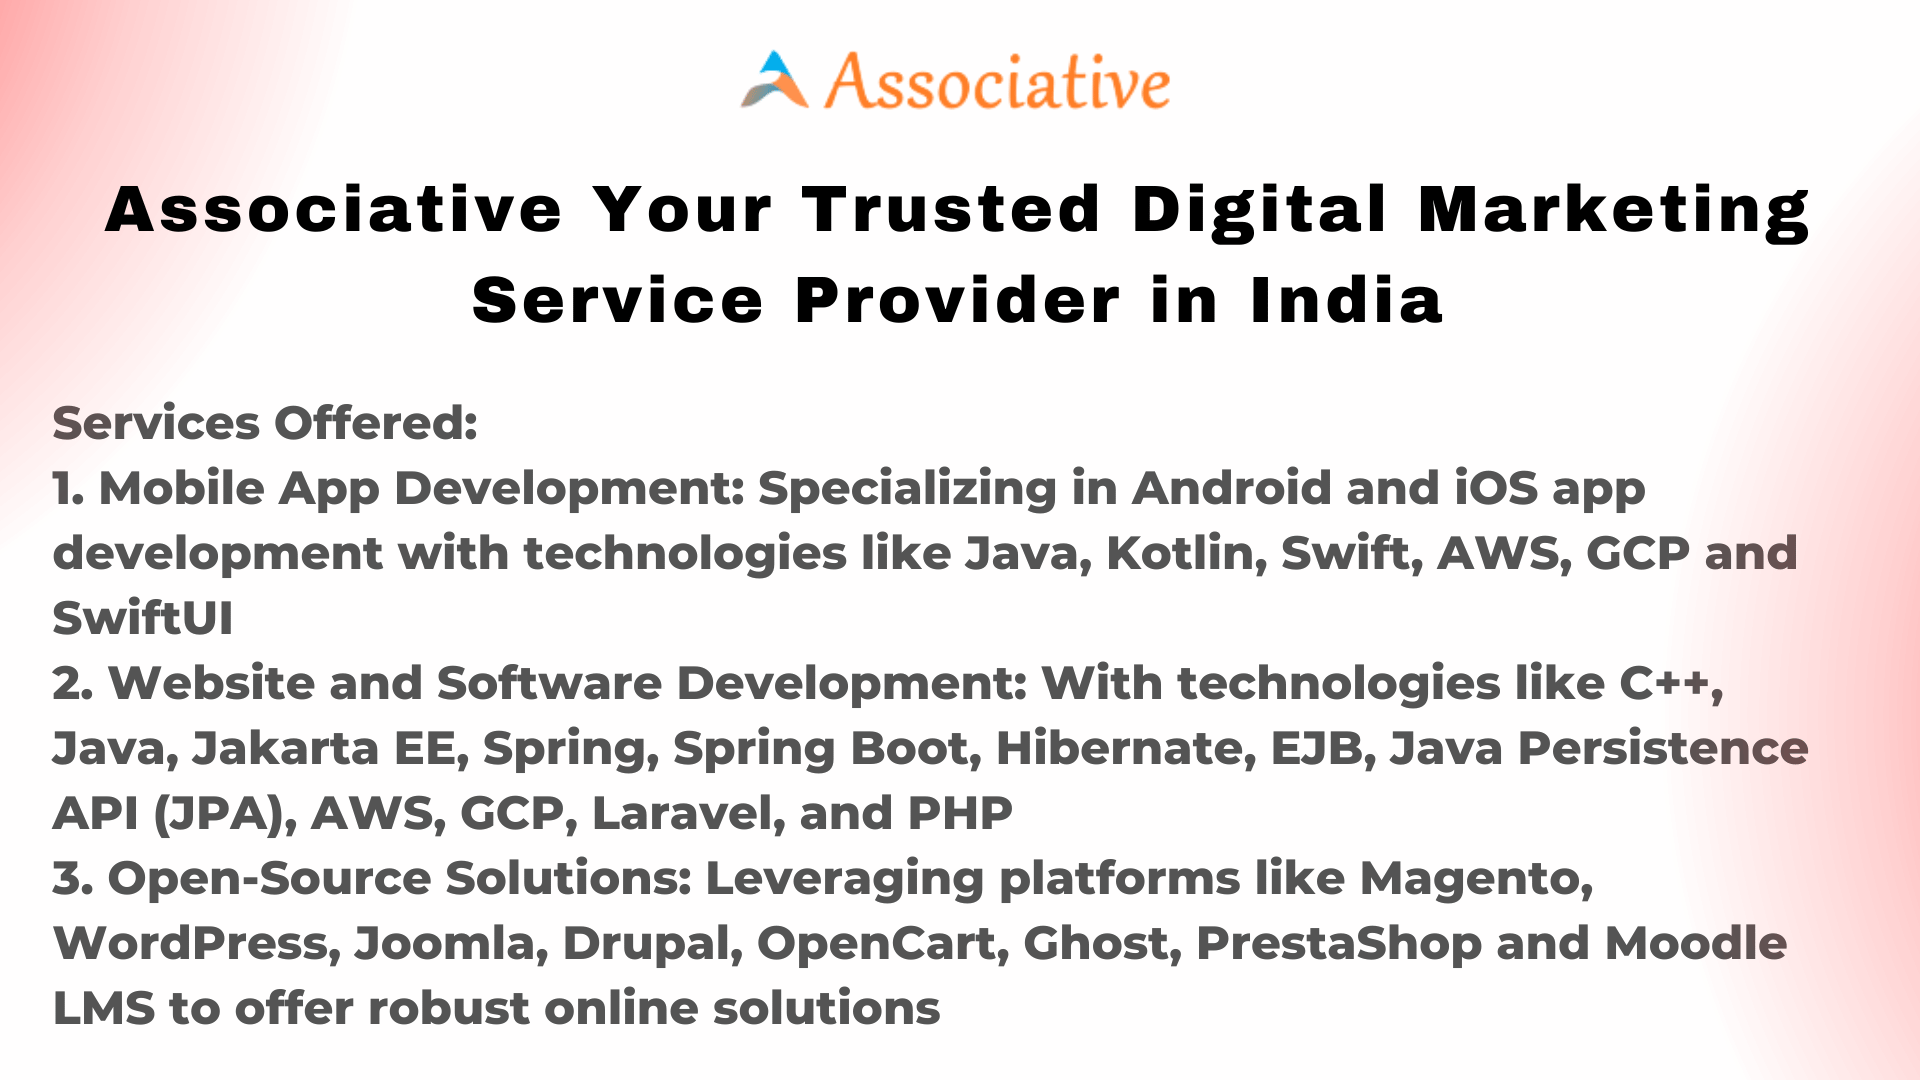 Associative Your Trusted Digital Marketing Service Provider in India